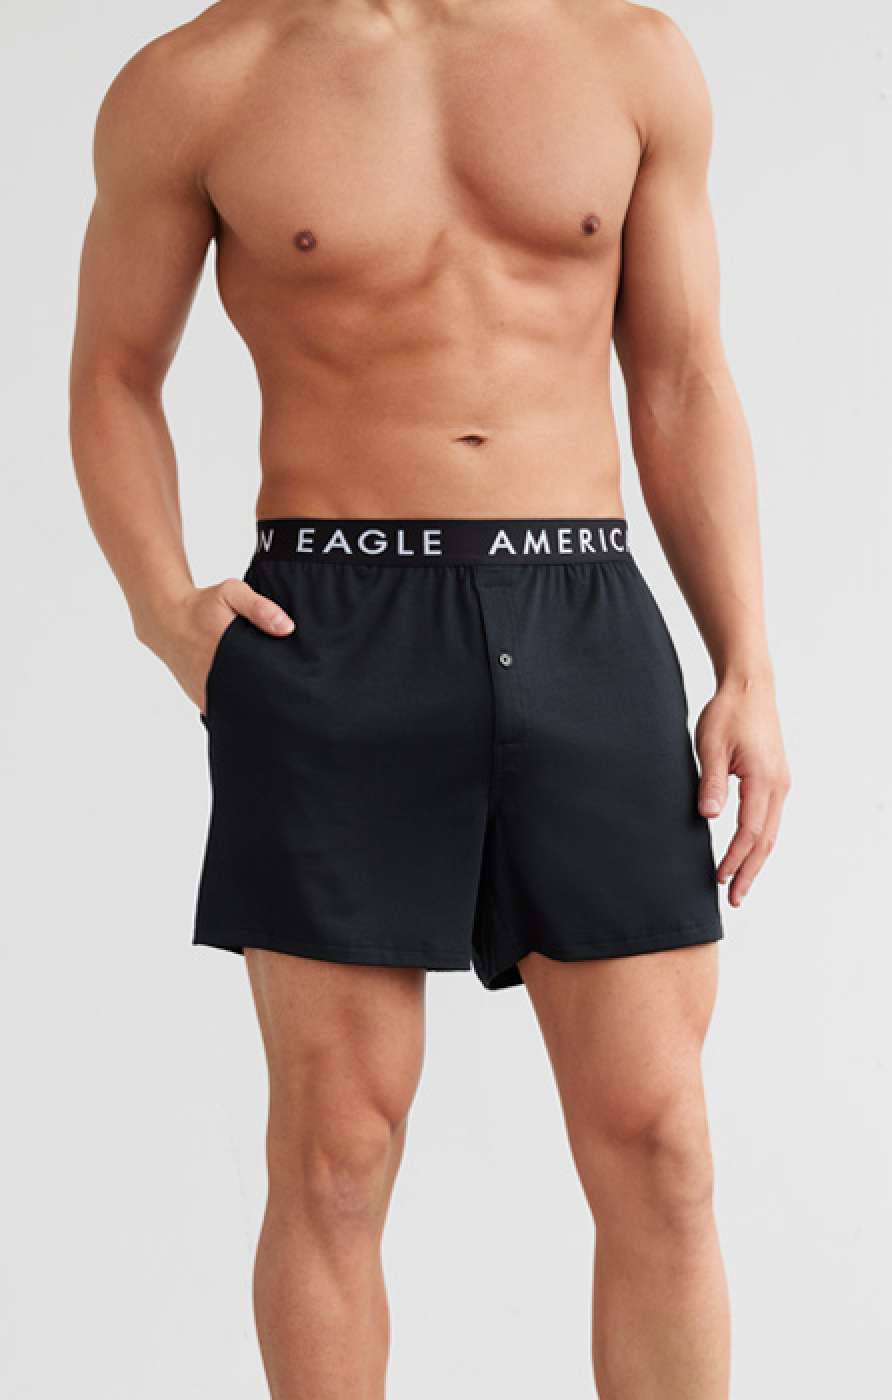 American Eagle - 📣 ATTENTION! 📣 Men's underwear in fun summer prints just  dropped! 🦩🏖 Grab 3 for $33 in-stores and online now